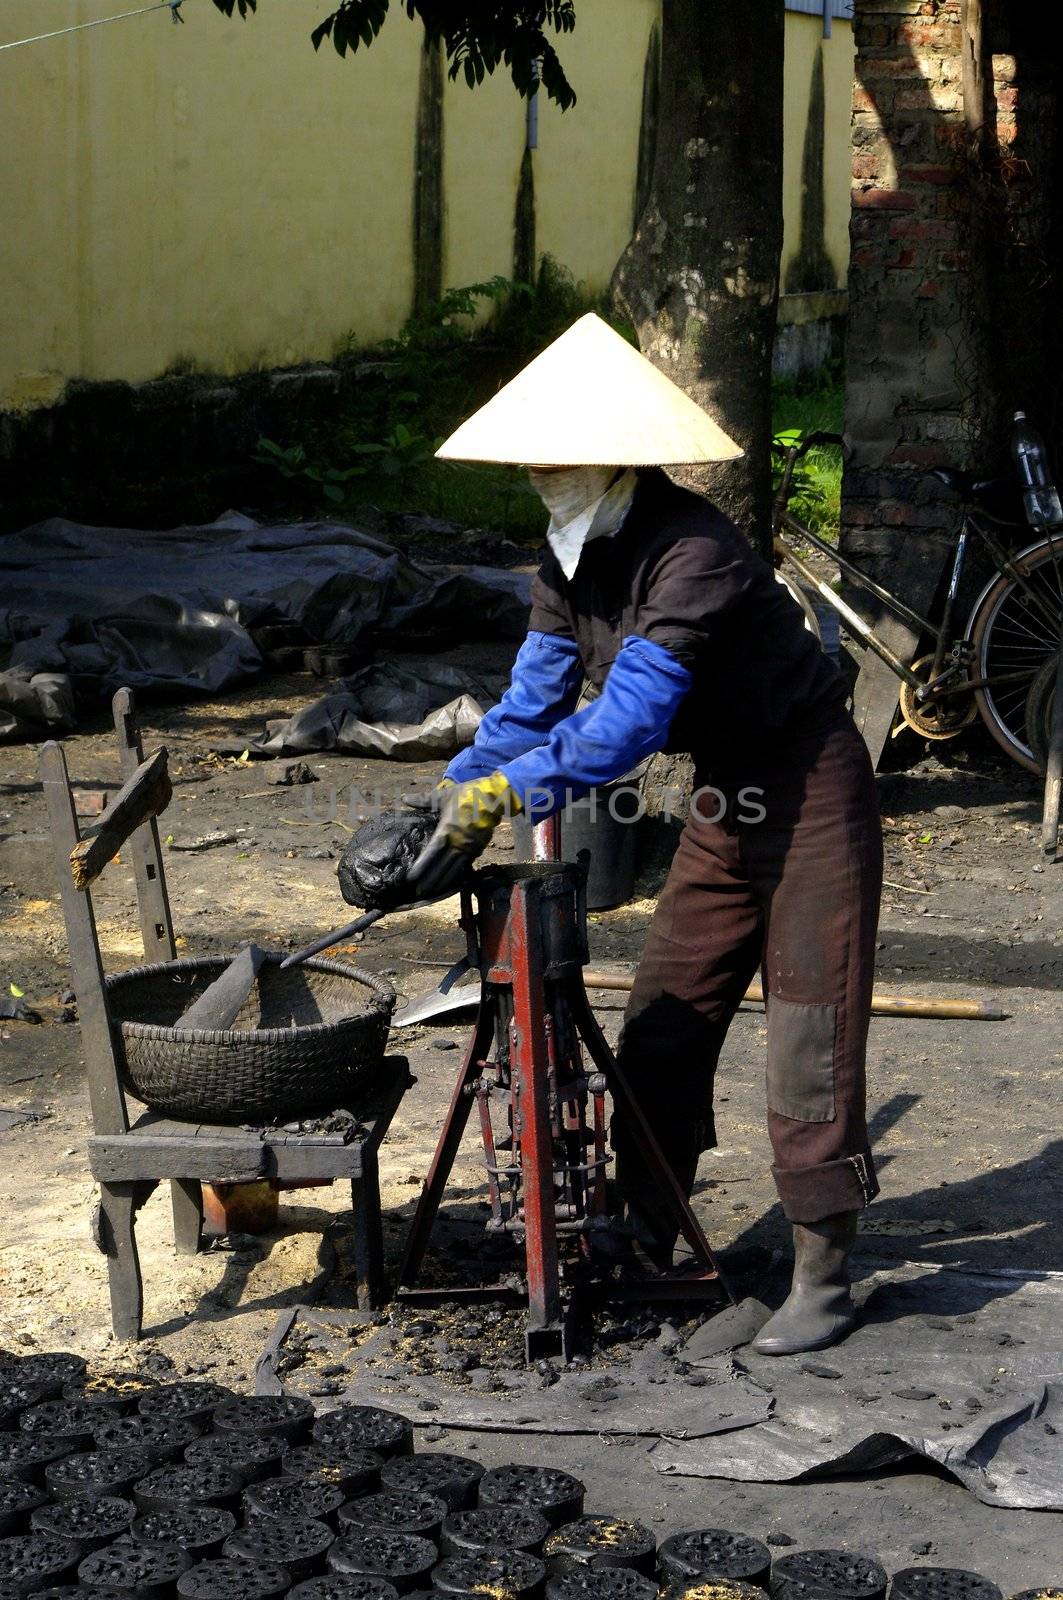 This woman using her machine manufactures cylinder of coal which are used even in town to cook. The gas bottle is too expensive for many homes.
The manufacture involves mixing coal dust with poor quality water into a paste. Then this paste is introduced into the upper part of the machine. Then closed the lid and then actuates the piston rises by below for compacting the dough and make holes in the pavement of coal. It is dried in the sun